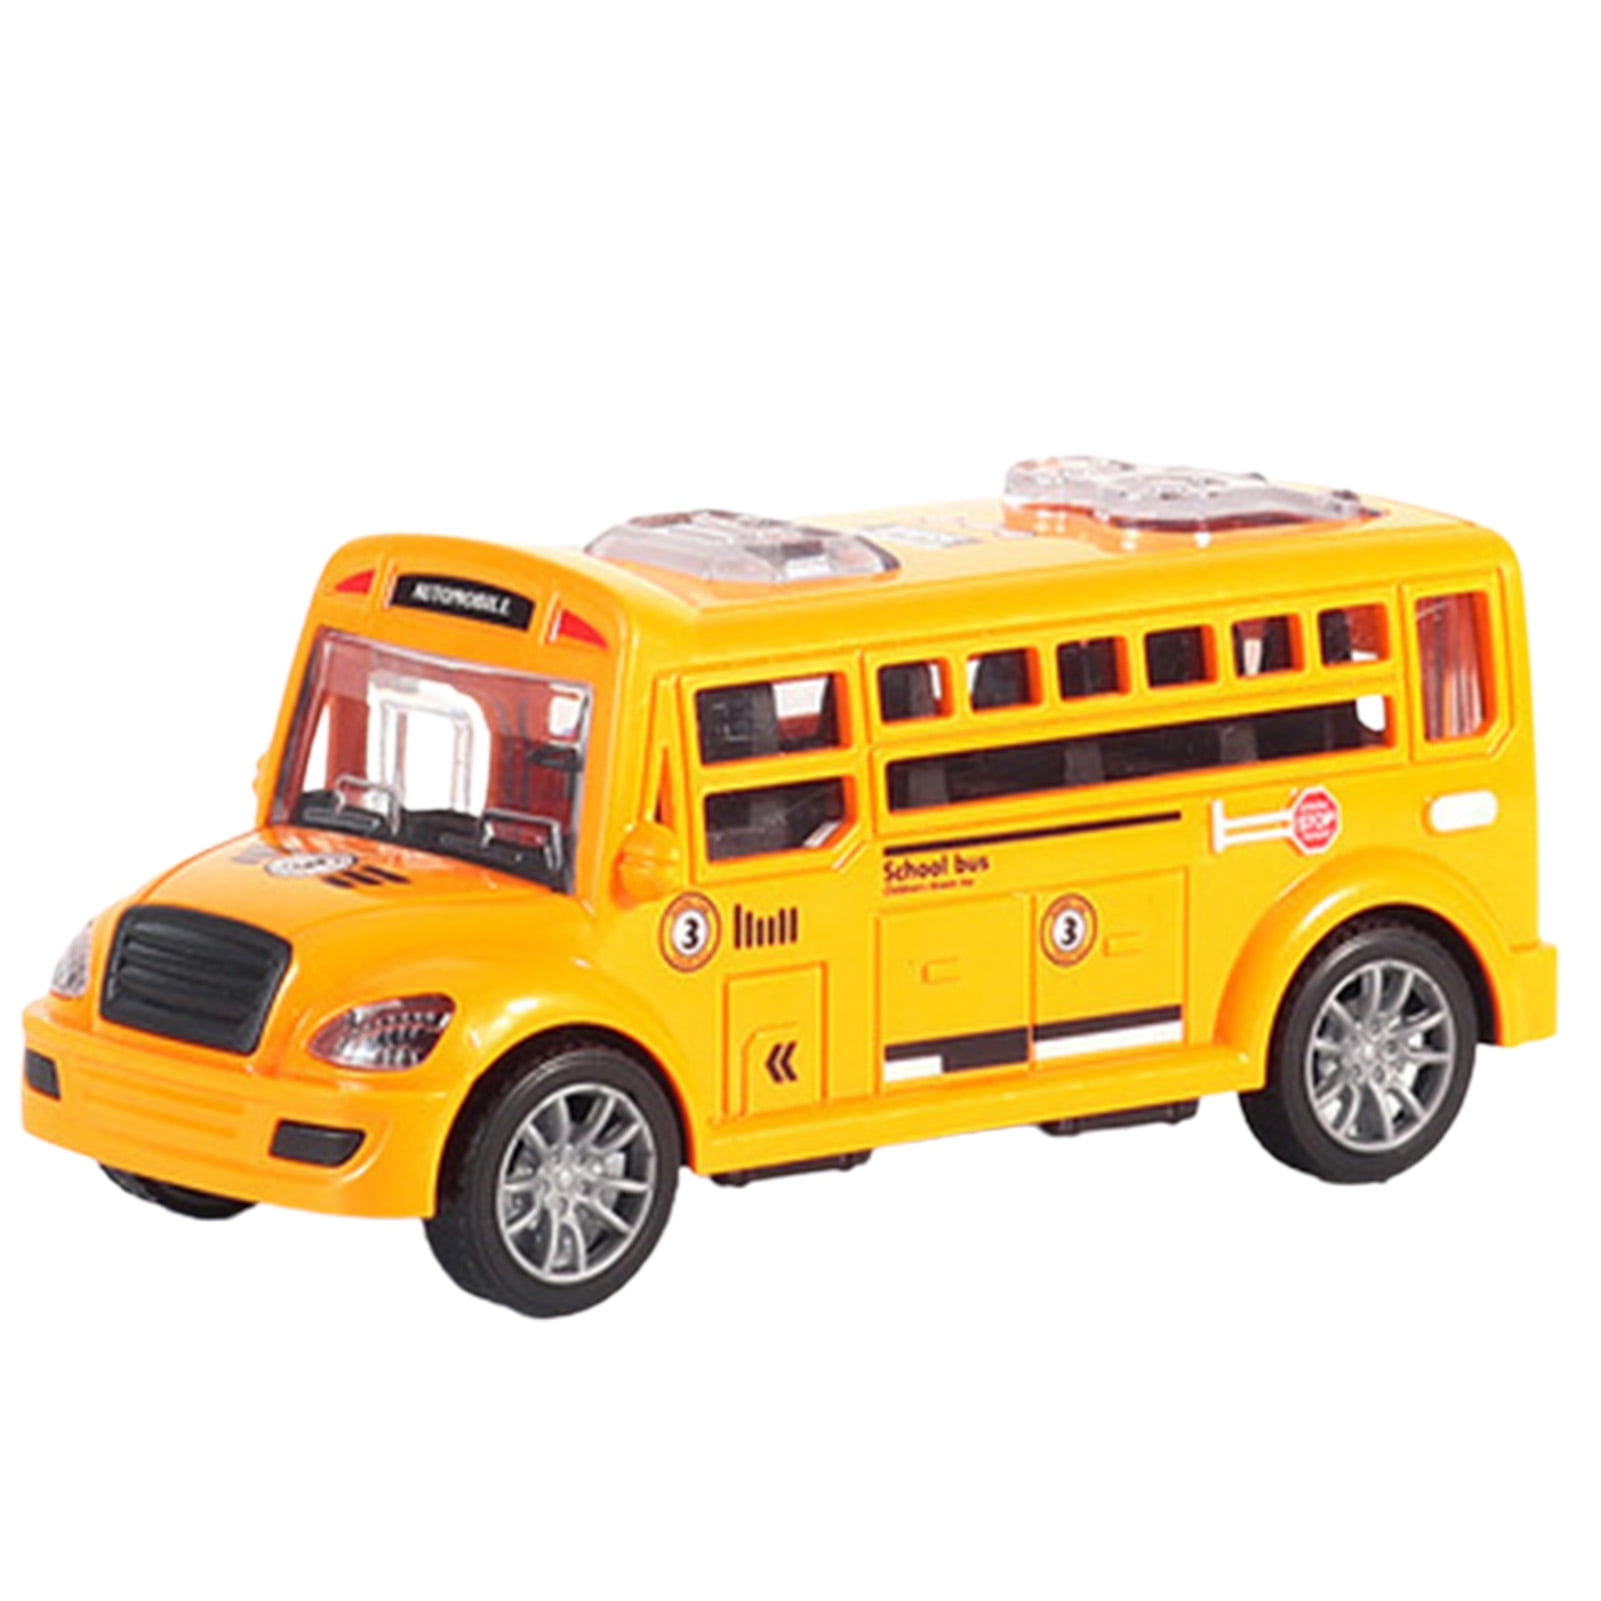 Mighty Wheels Die Cast School Bus Ages 3 New Toy Boys Girls Play Happy Gift Car 